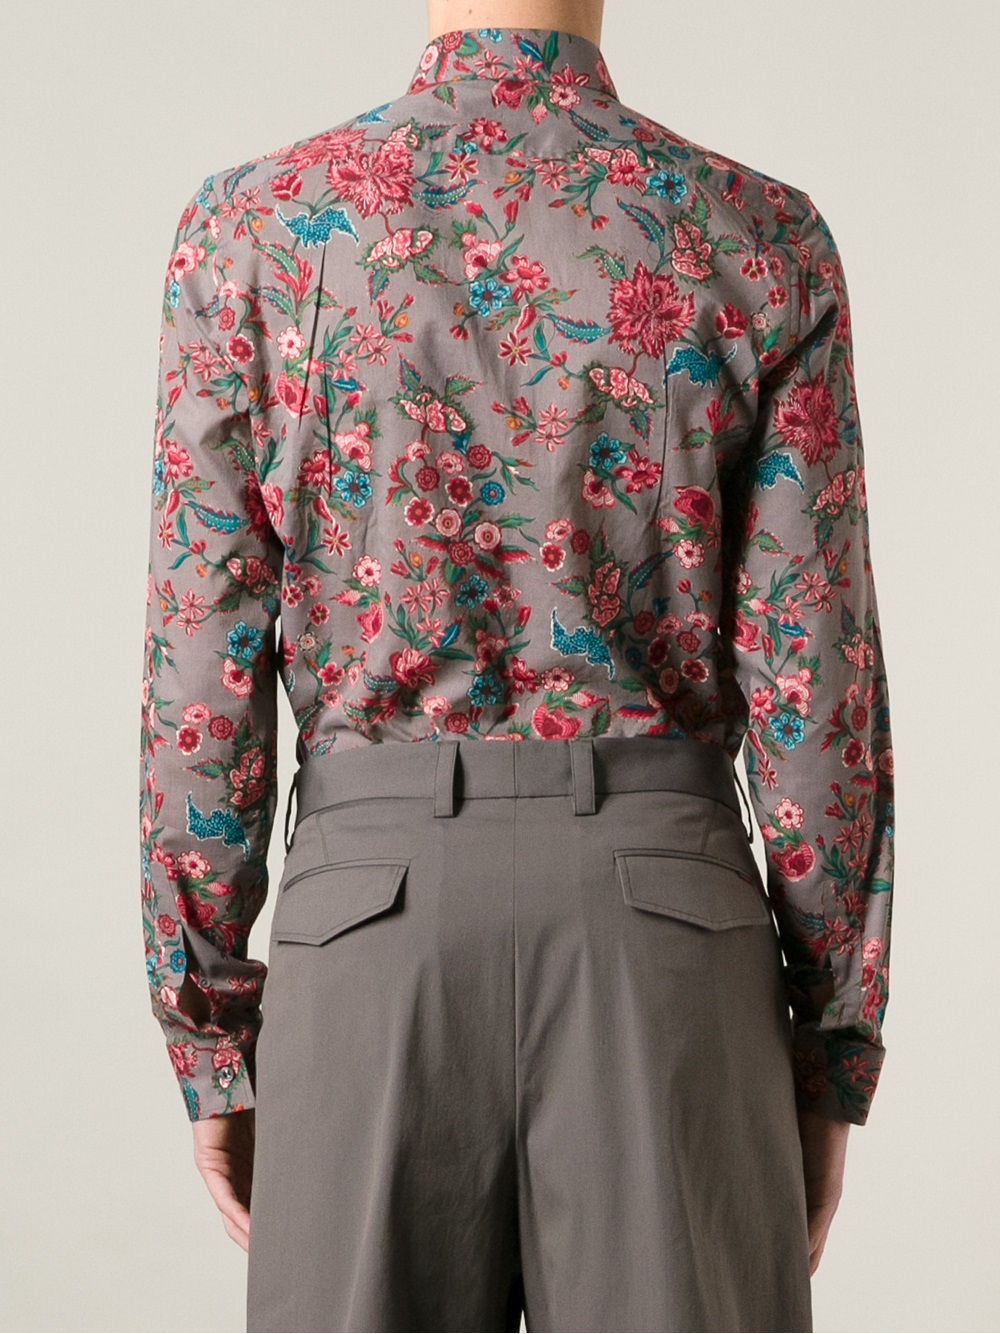 Lyst - Gucci Floral Print Shirt in Purple for Men